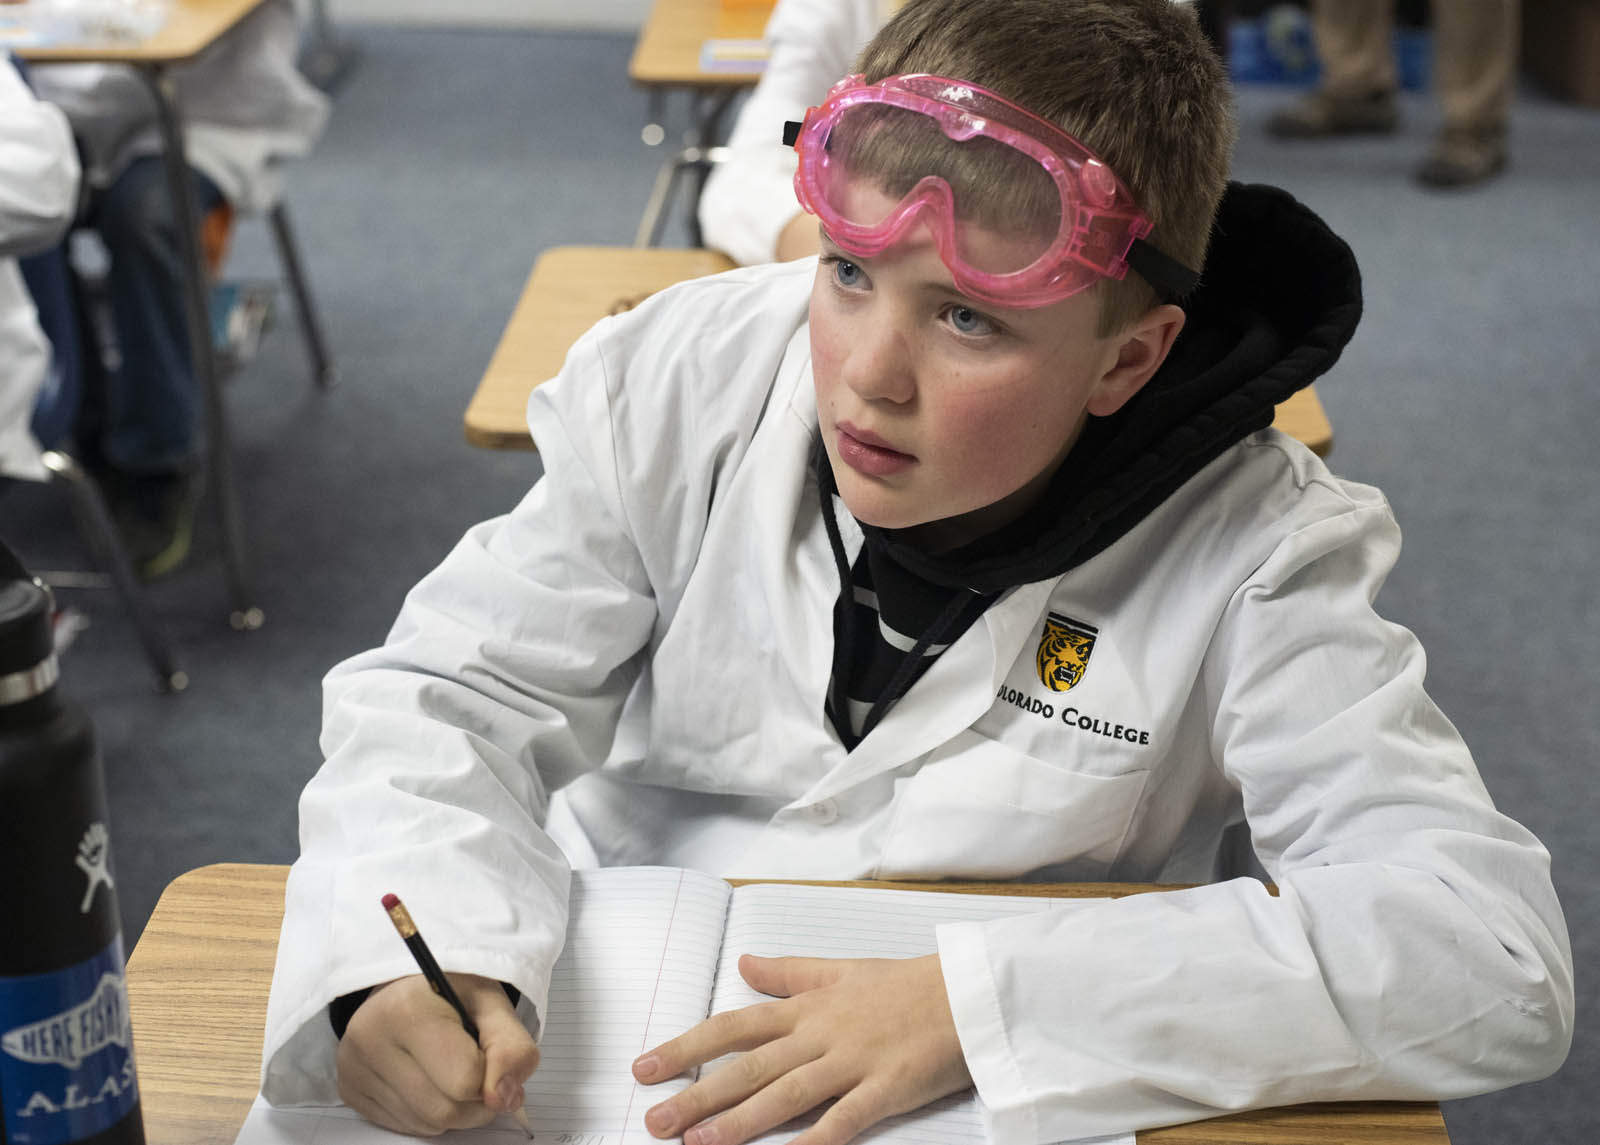 Part of the program for La Veta Elementary School students was the exciting opportunity to wear CC lab jackets and goggles during experiments. Photo by Jennifer Coombes.